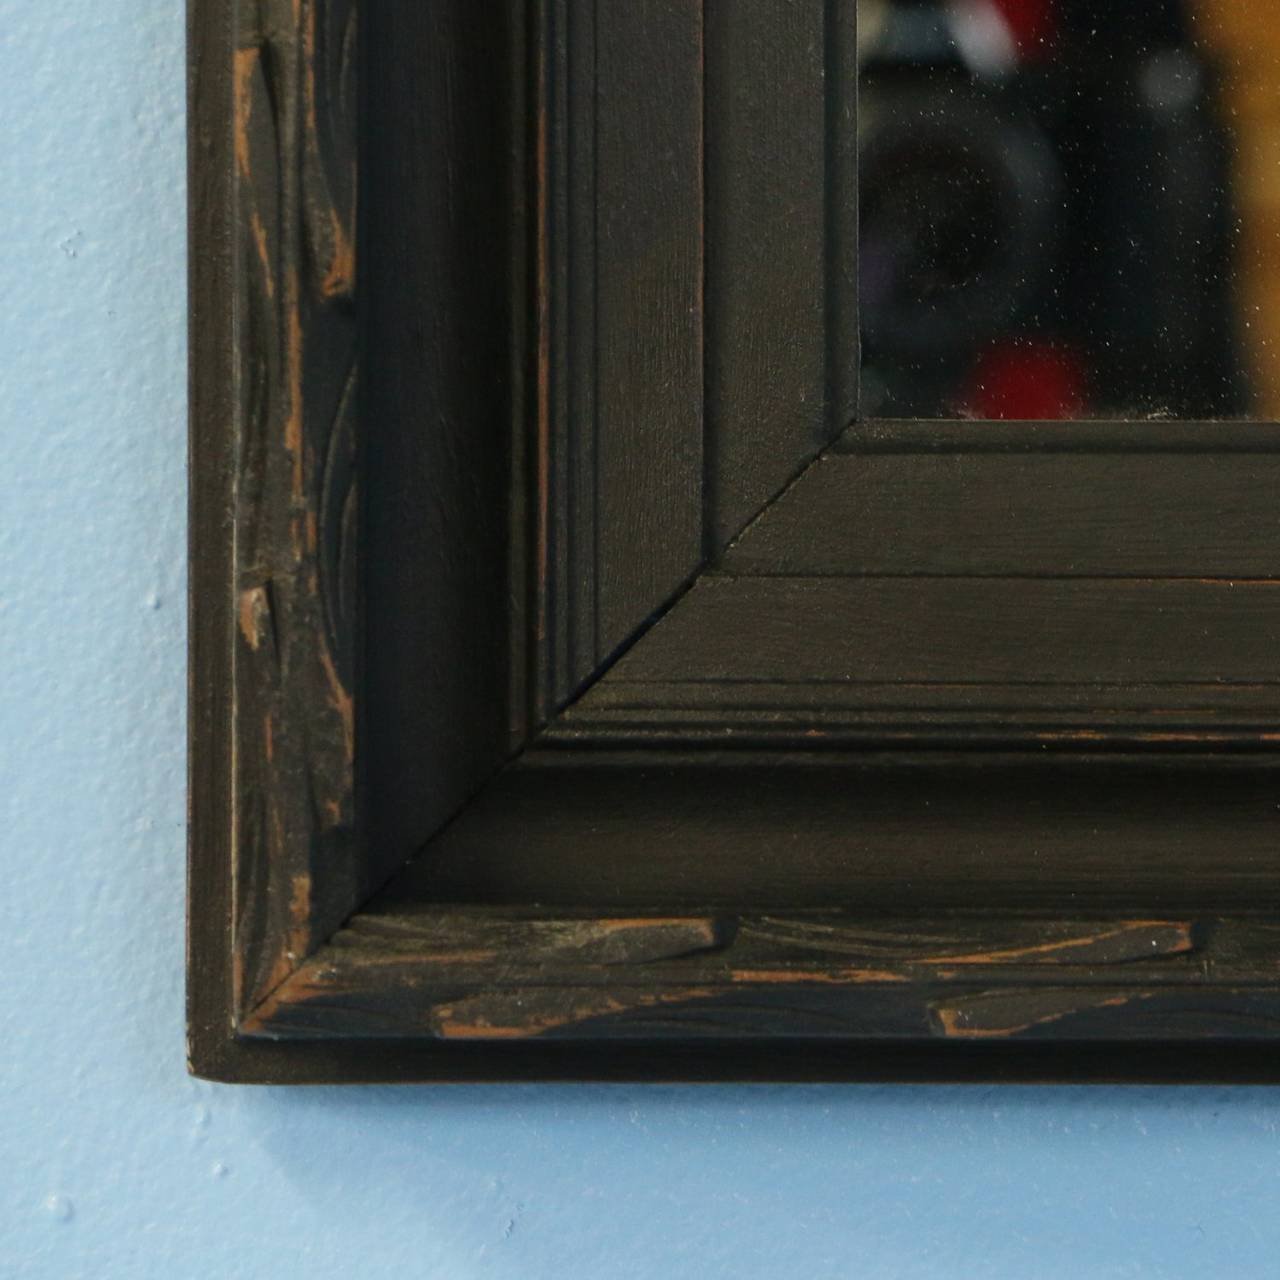 This old mirror has recently been given a fresh black painted finish and is ready to be hung either horizontally or vertically. See the close up photo to view the detail along the edging.